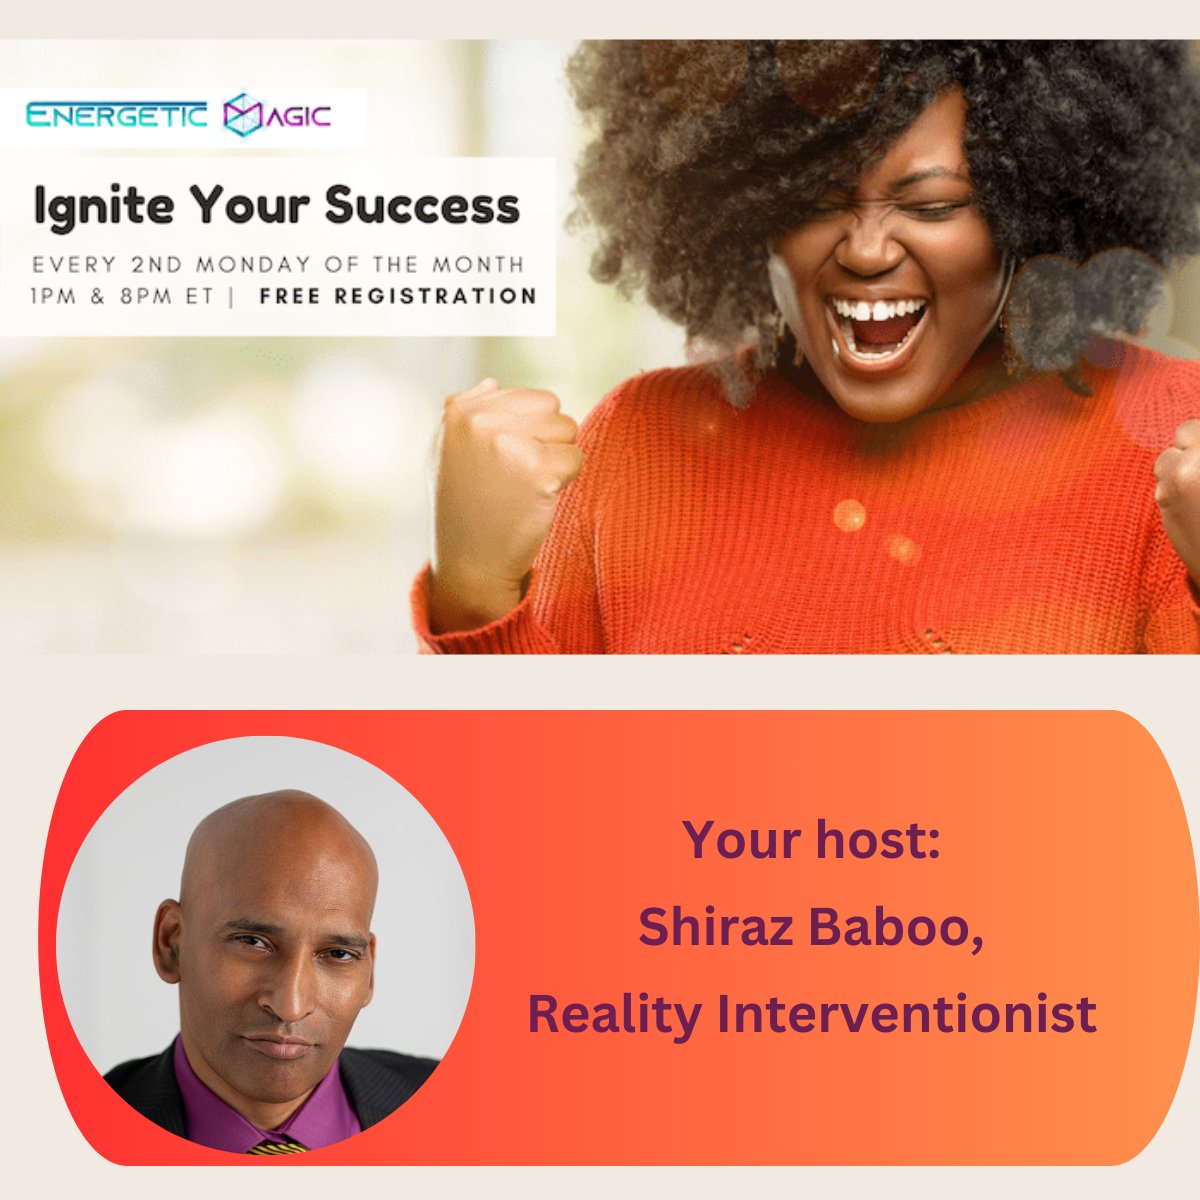 Could limiting beliefs be 'cluttering your brain' and getting in the way of your success?

Find out this Monday with my coach, Shiraz, at no cost, AND  incredible prizes!  bit.ly/3Kjs9yh

#MentalClutter #LimitingBelief #MentalBlock  #EnergeticMagic #DeclutterTheBrain